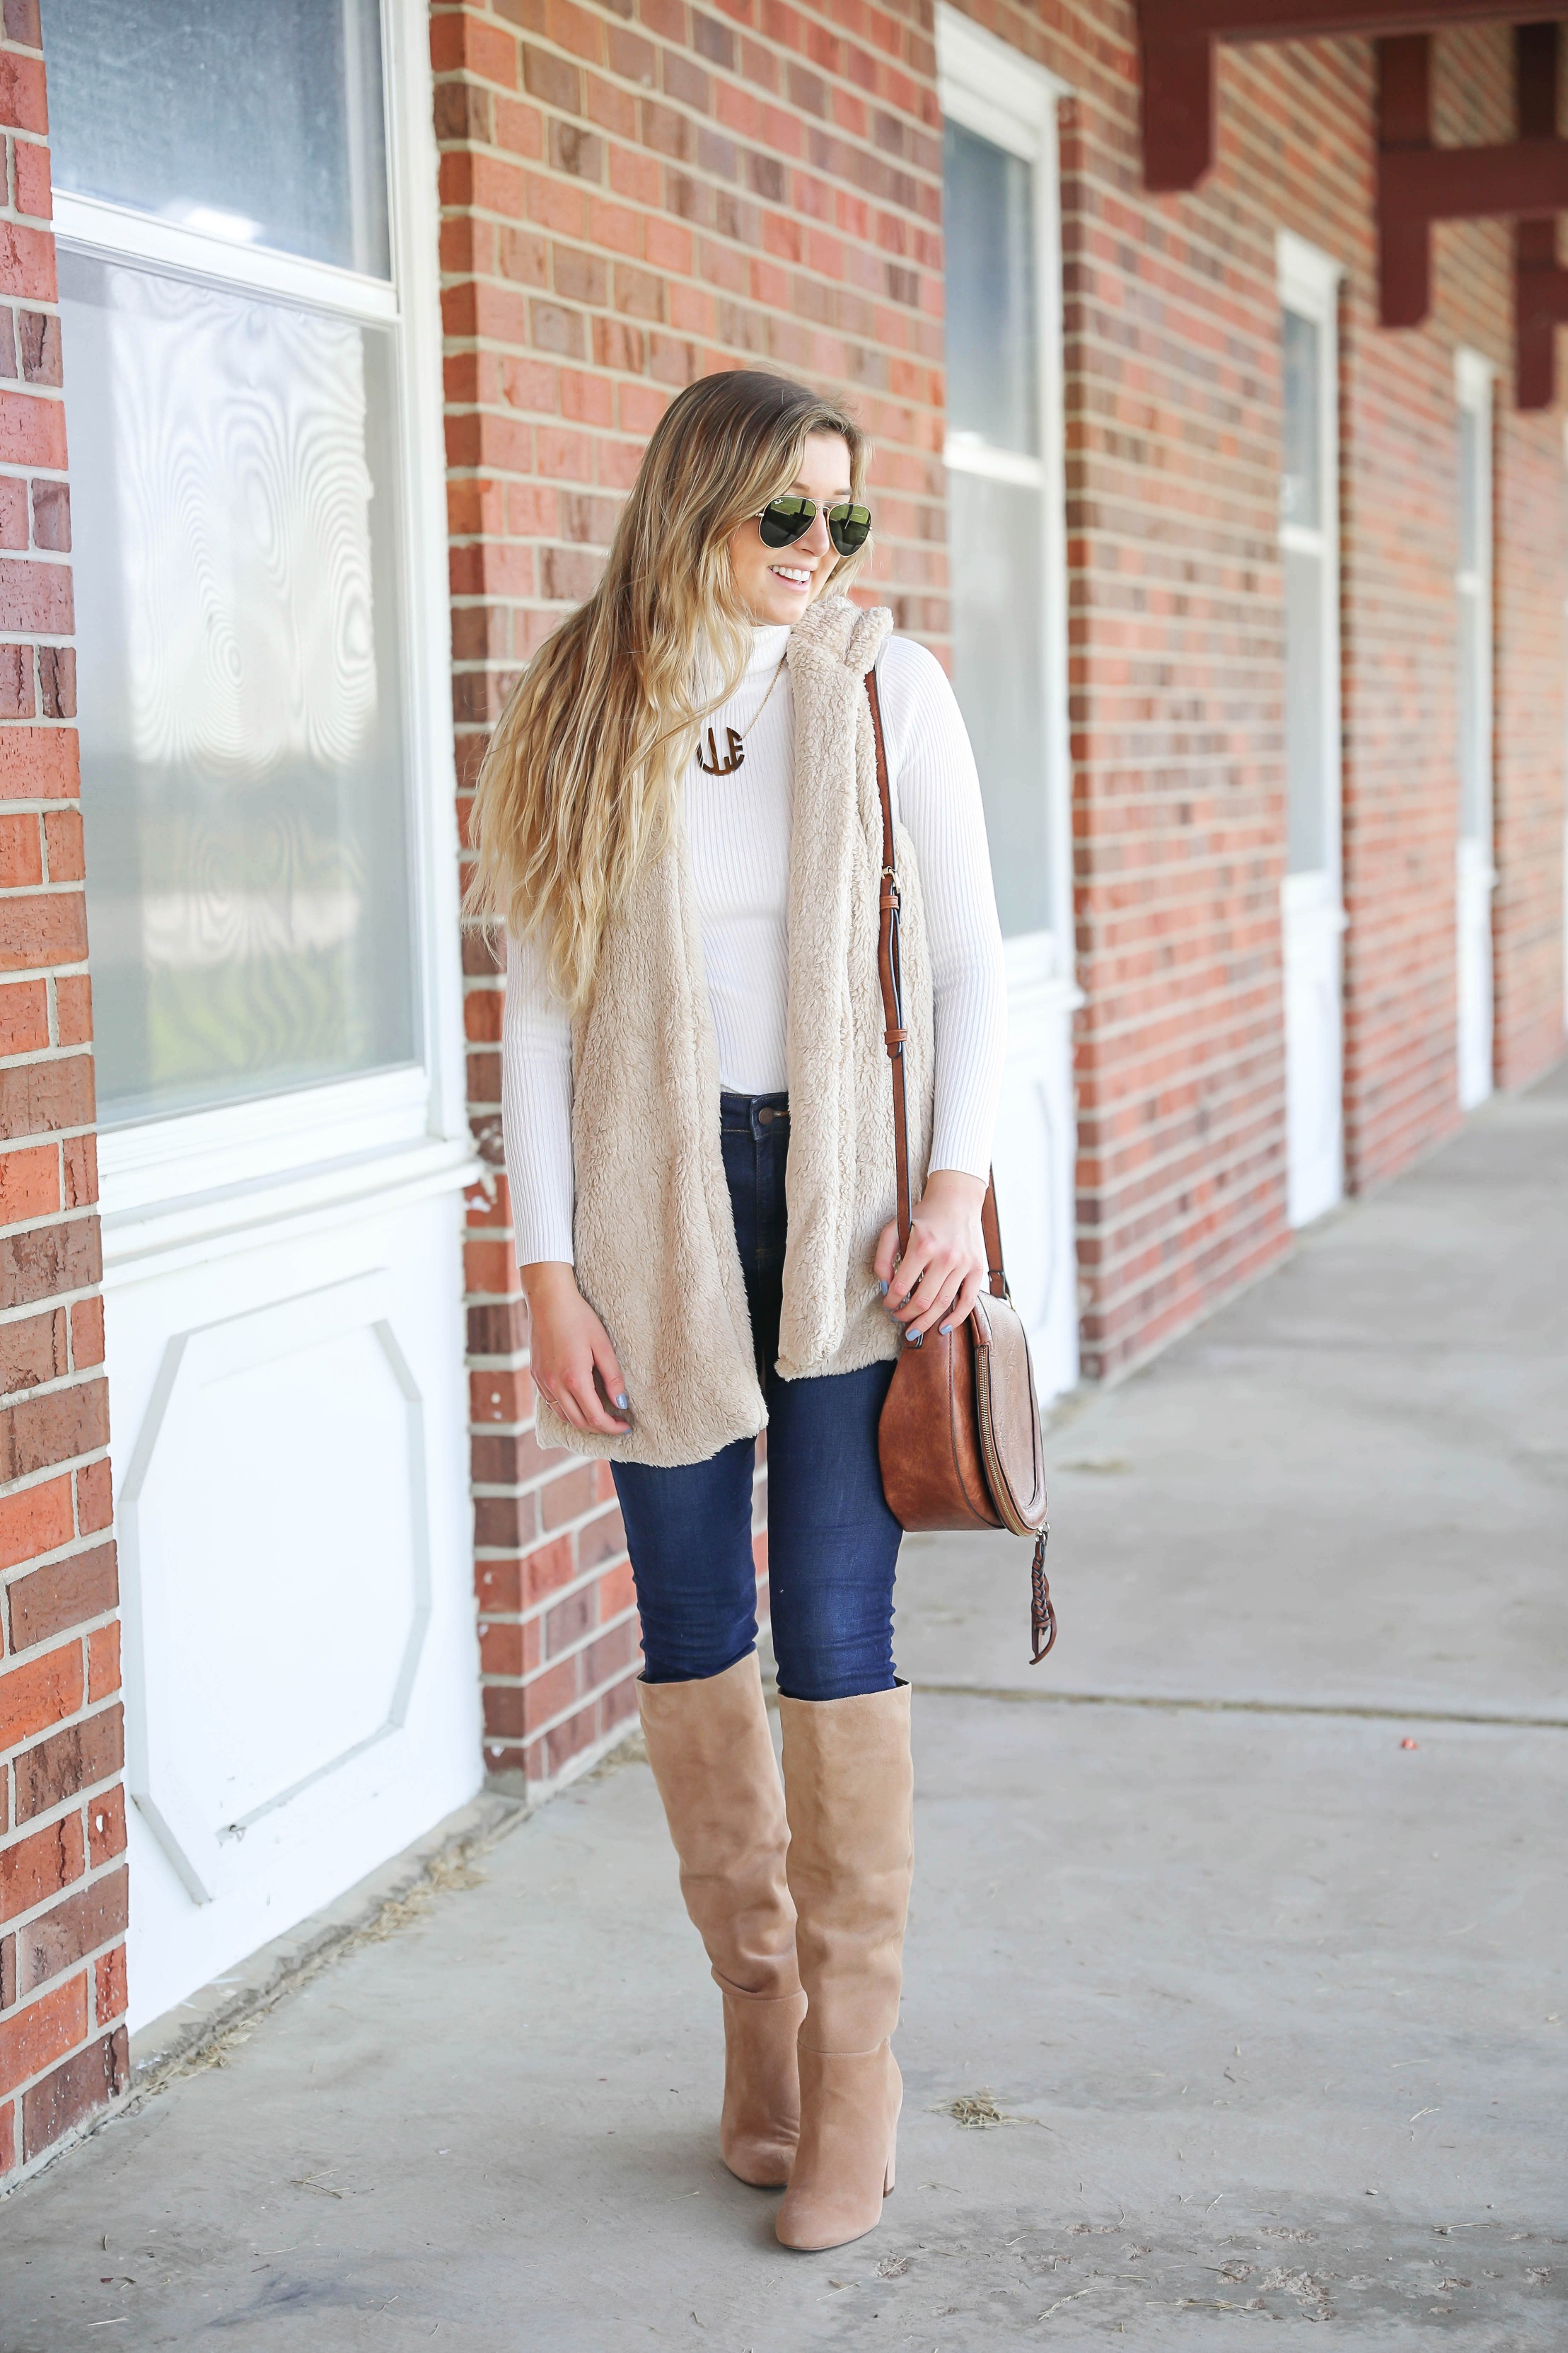 Cozy Teddy Bear Vest for Fall | OOTD + More Vests Rounded Up! – Lauren ...